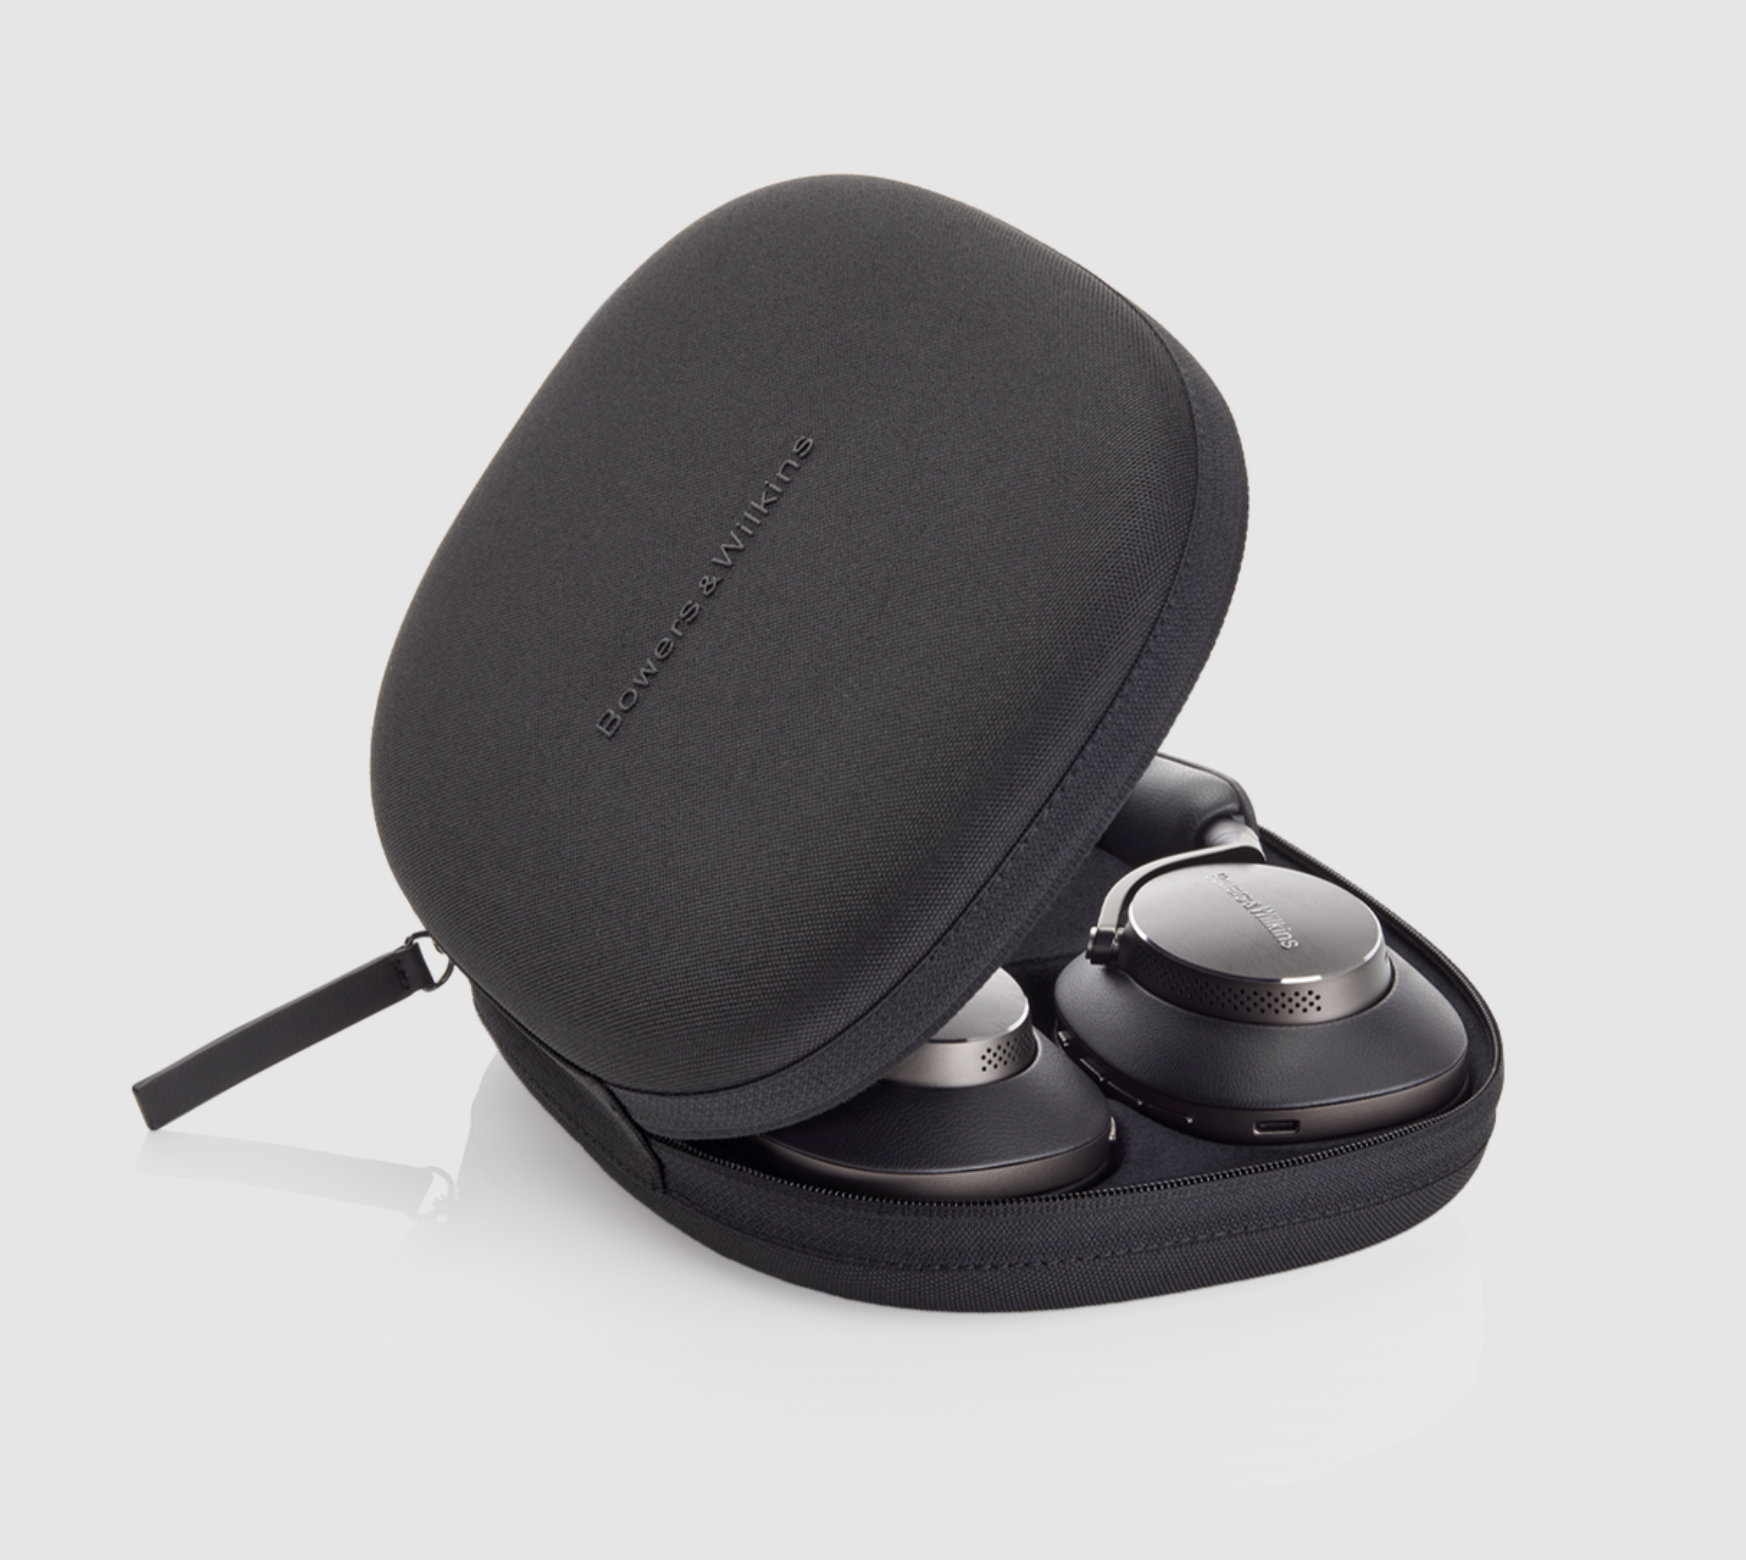 B&W Px8 Noise Cancelling Headphones in Back. Image of case